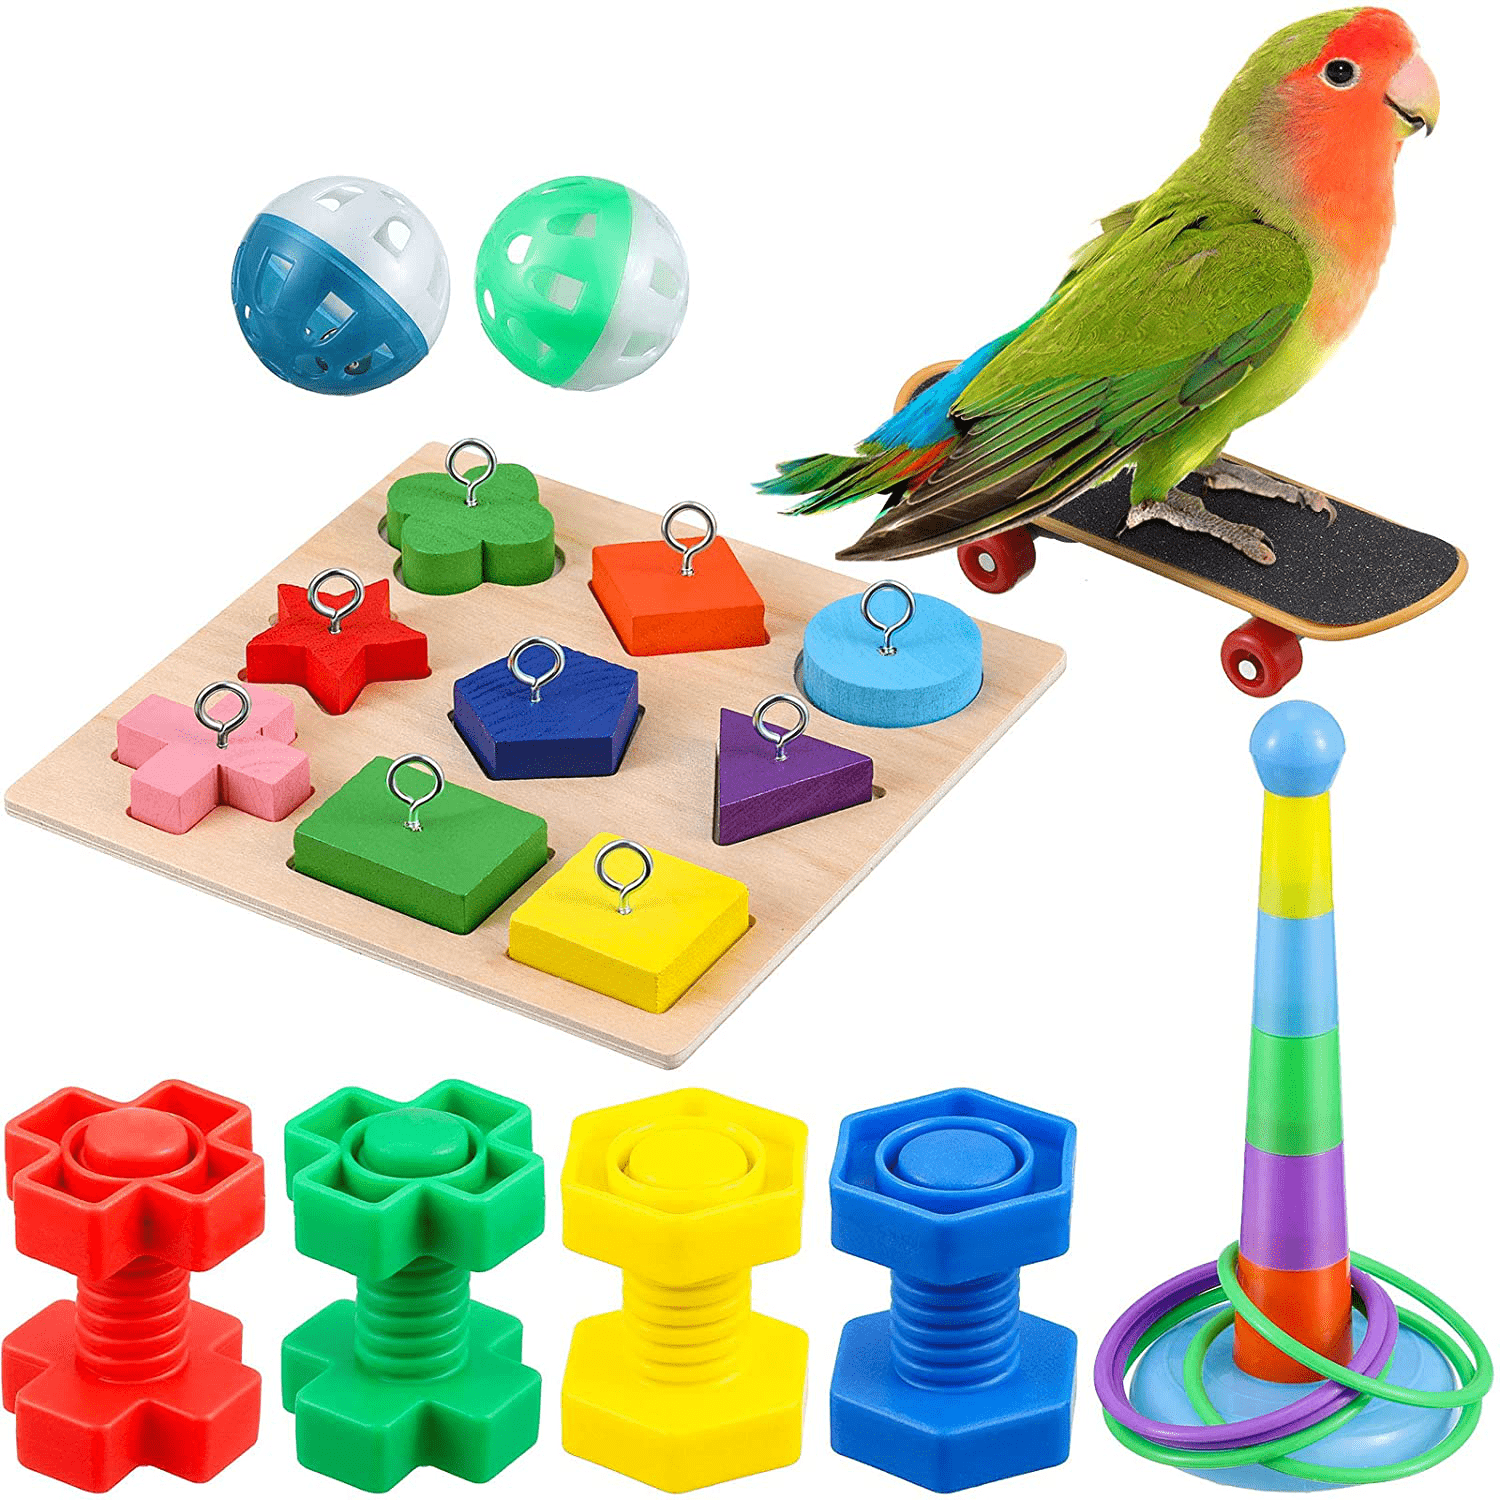 6 Pieces Bird Training Toys Parrot Intelligence Toy Parrot Wooden Block Puzzles Toy Stacking Rings Toy Mini Parrot Skateboard Nuts and Bolts Bird Toy Bell Balls for Budgie Parakeet Cockatiel Macaw